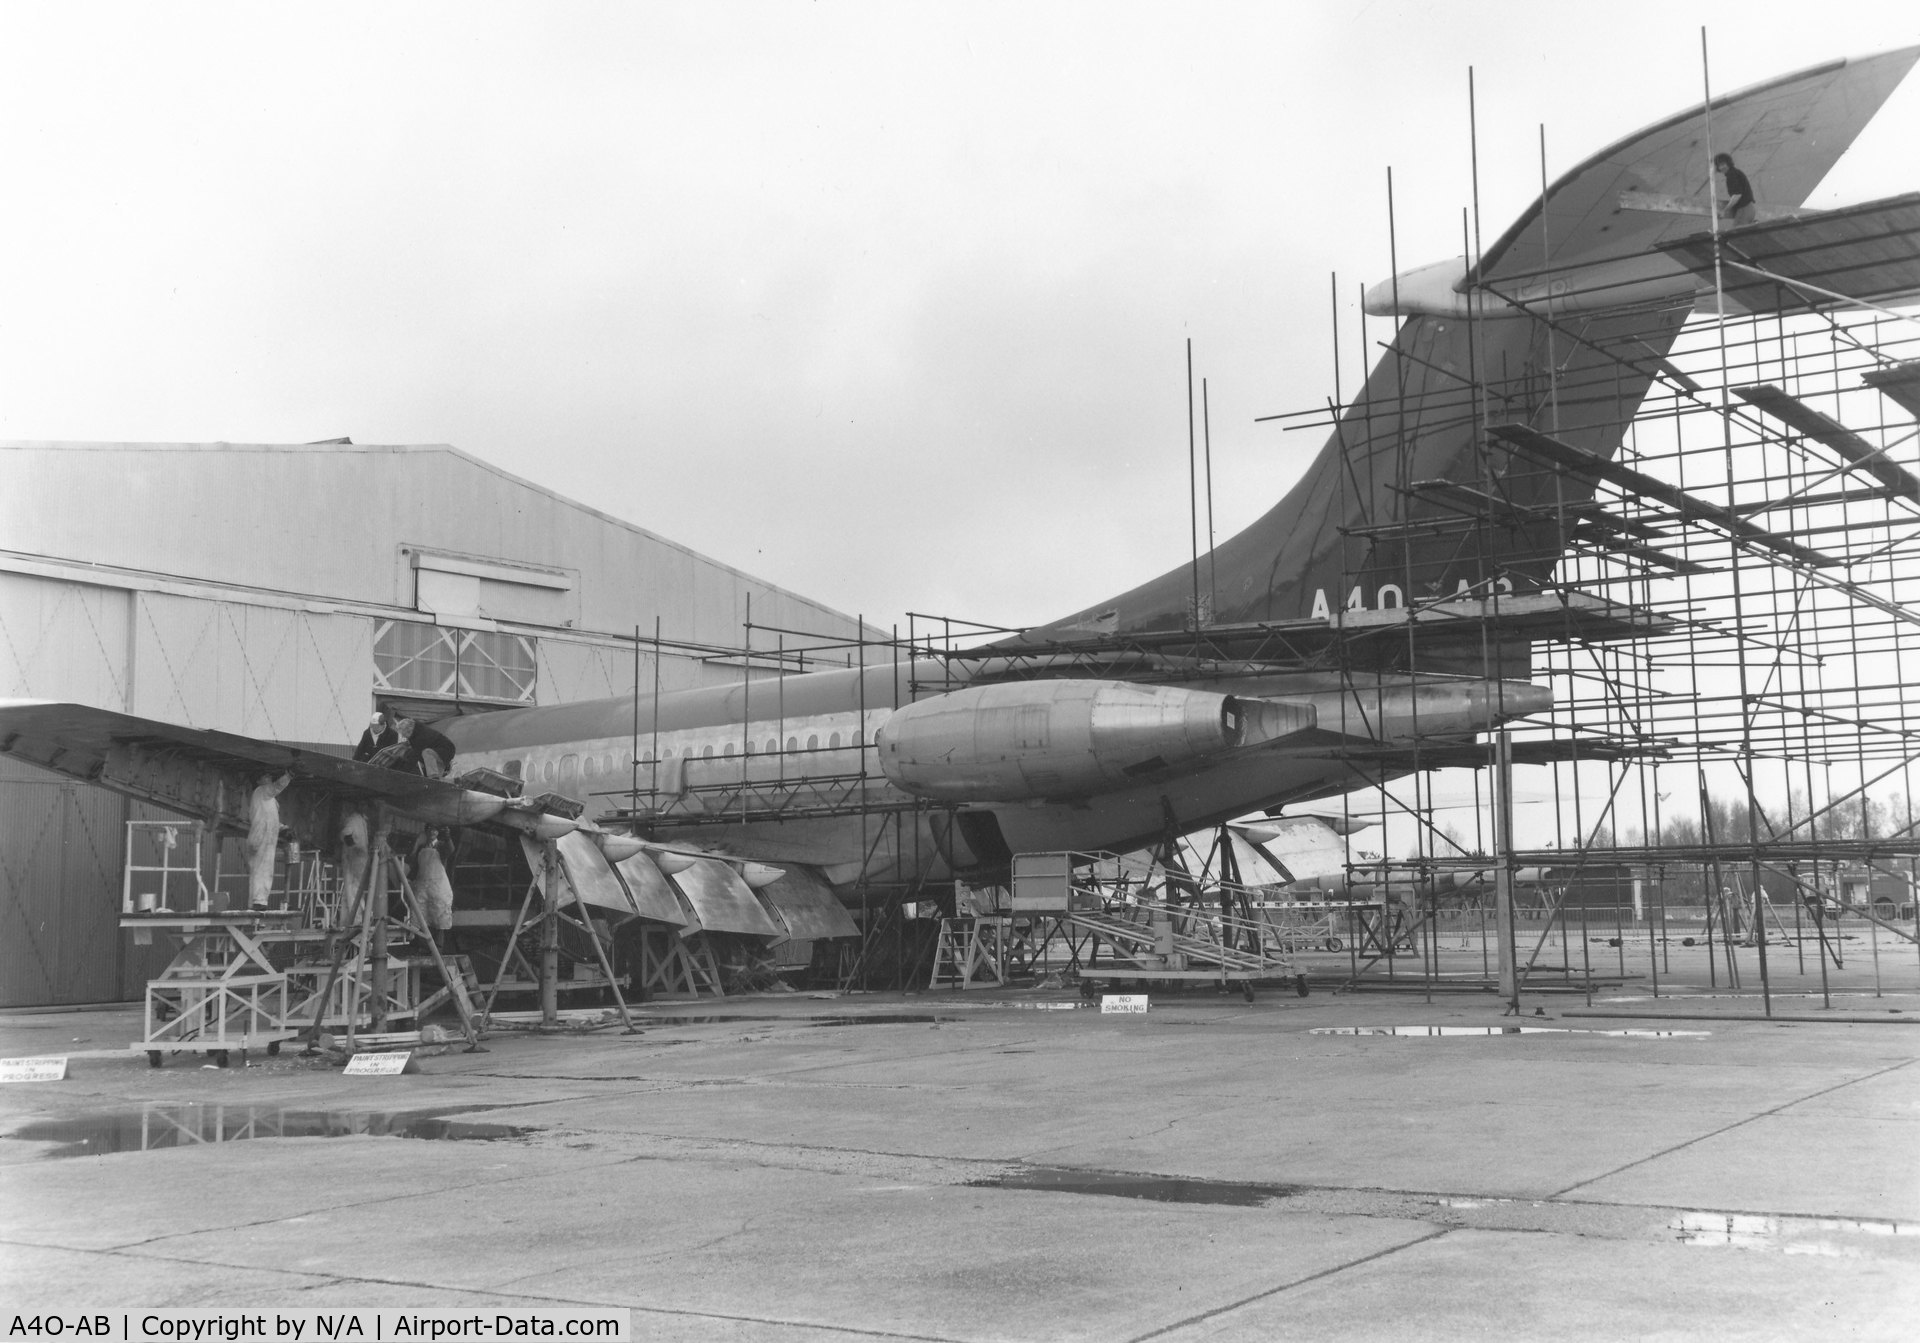 A4O-AB, 1963 Vickers VC10 Srs 1103 C/N 820, A40-AB being refitted prior to its career as Oman Royal Flight VC10